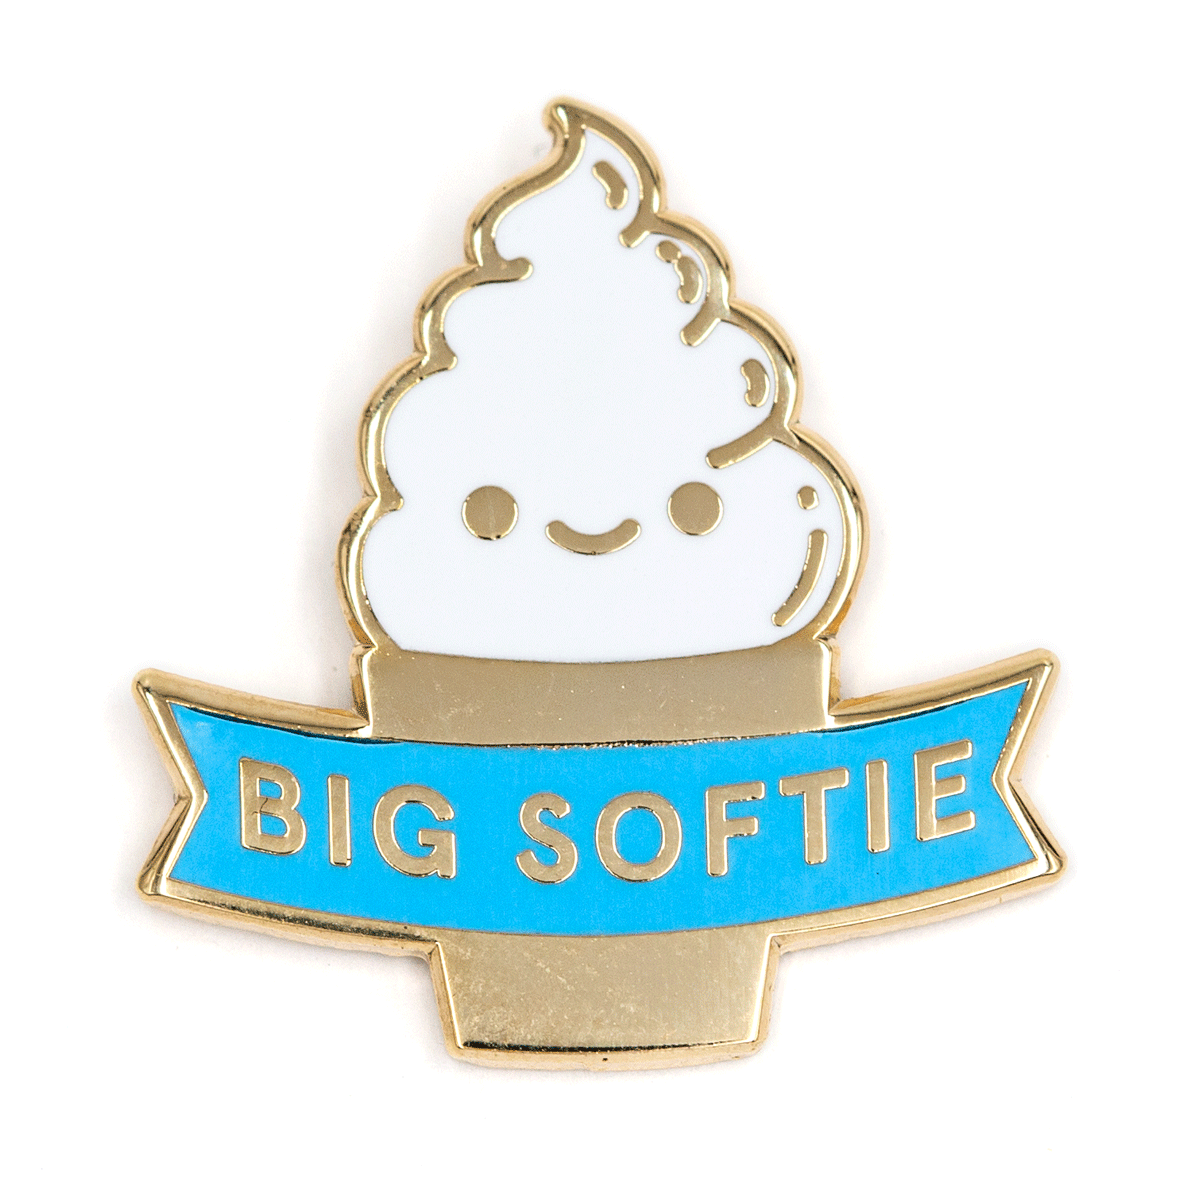 These Are Things - Big Softie Enamel Pin